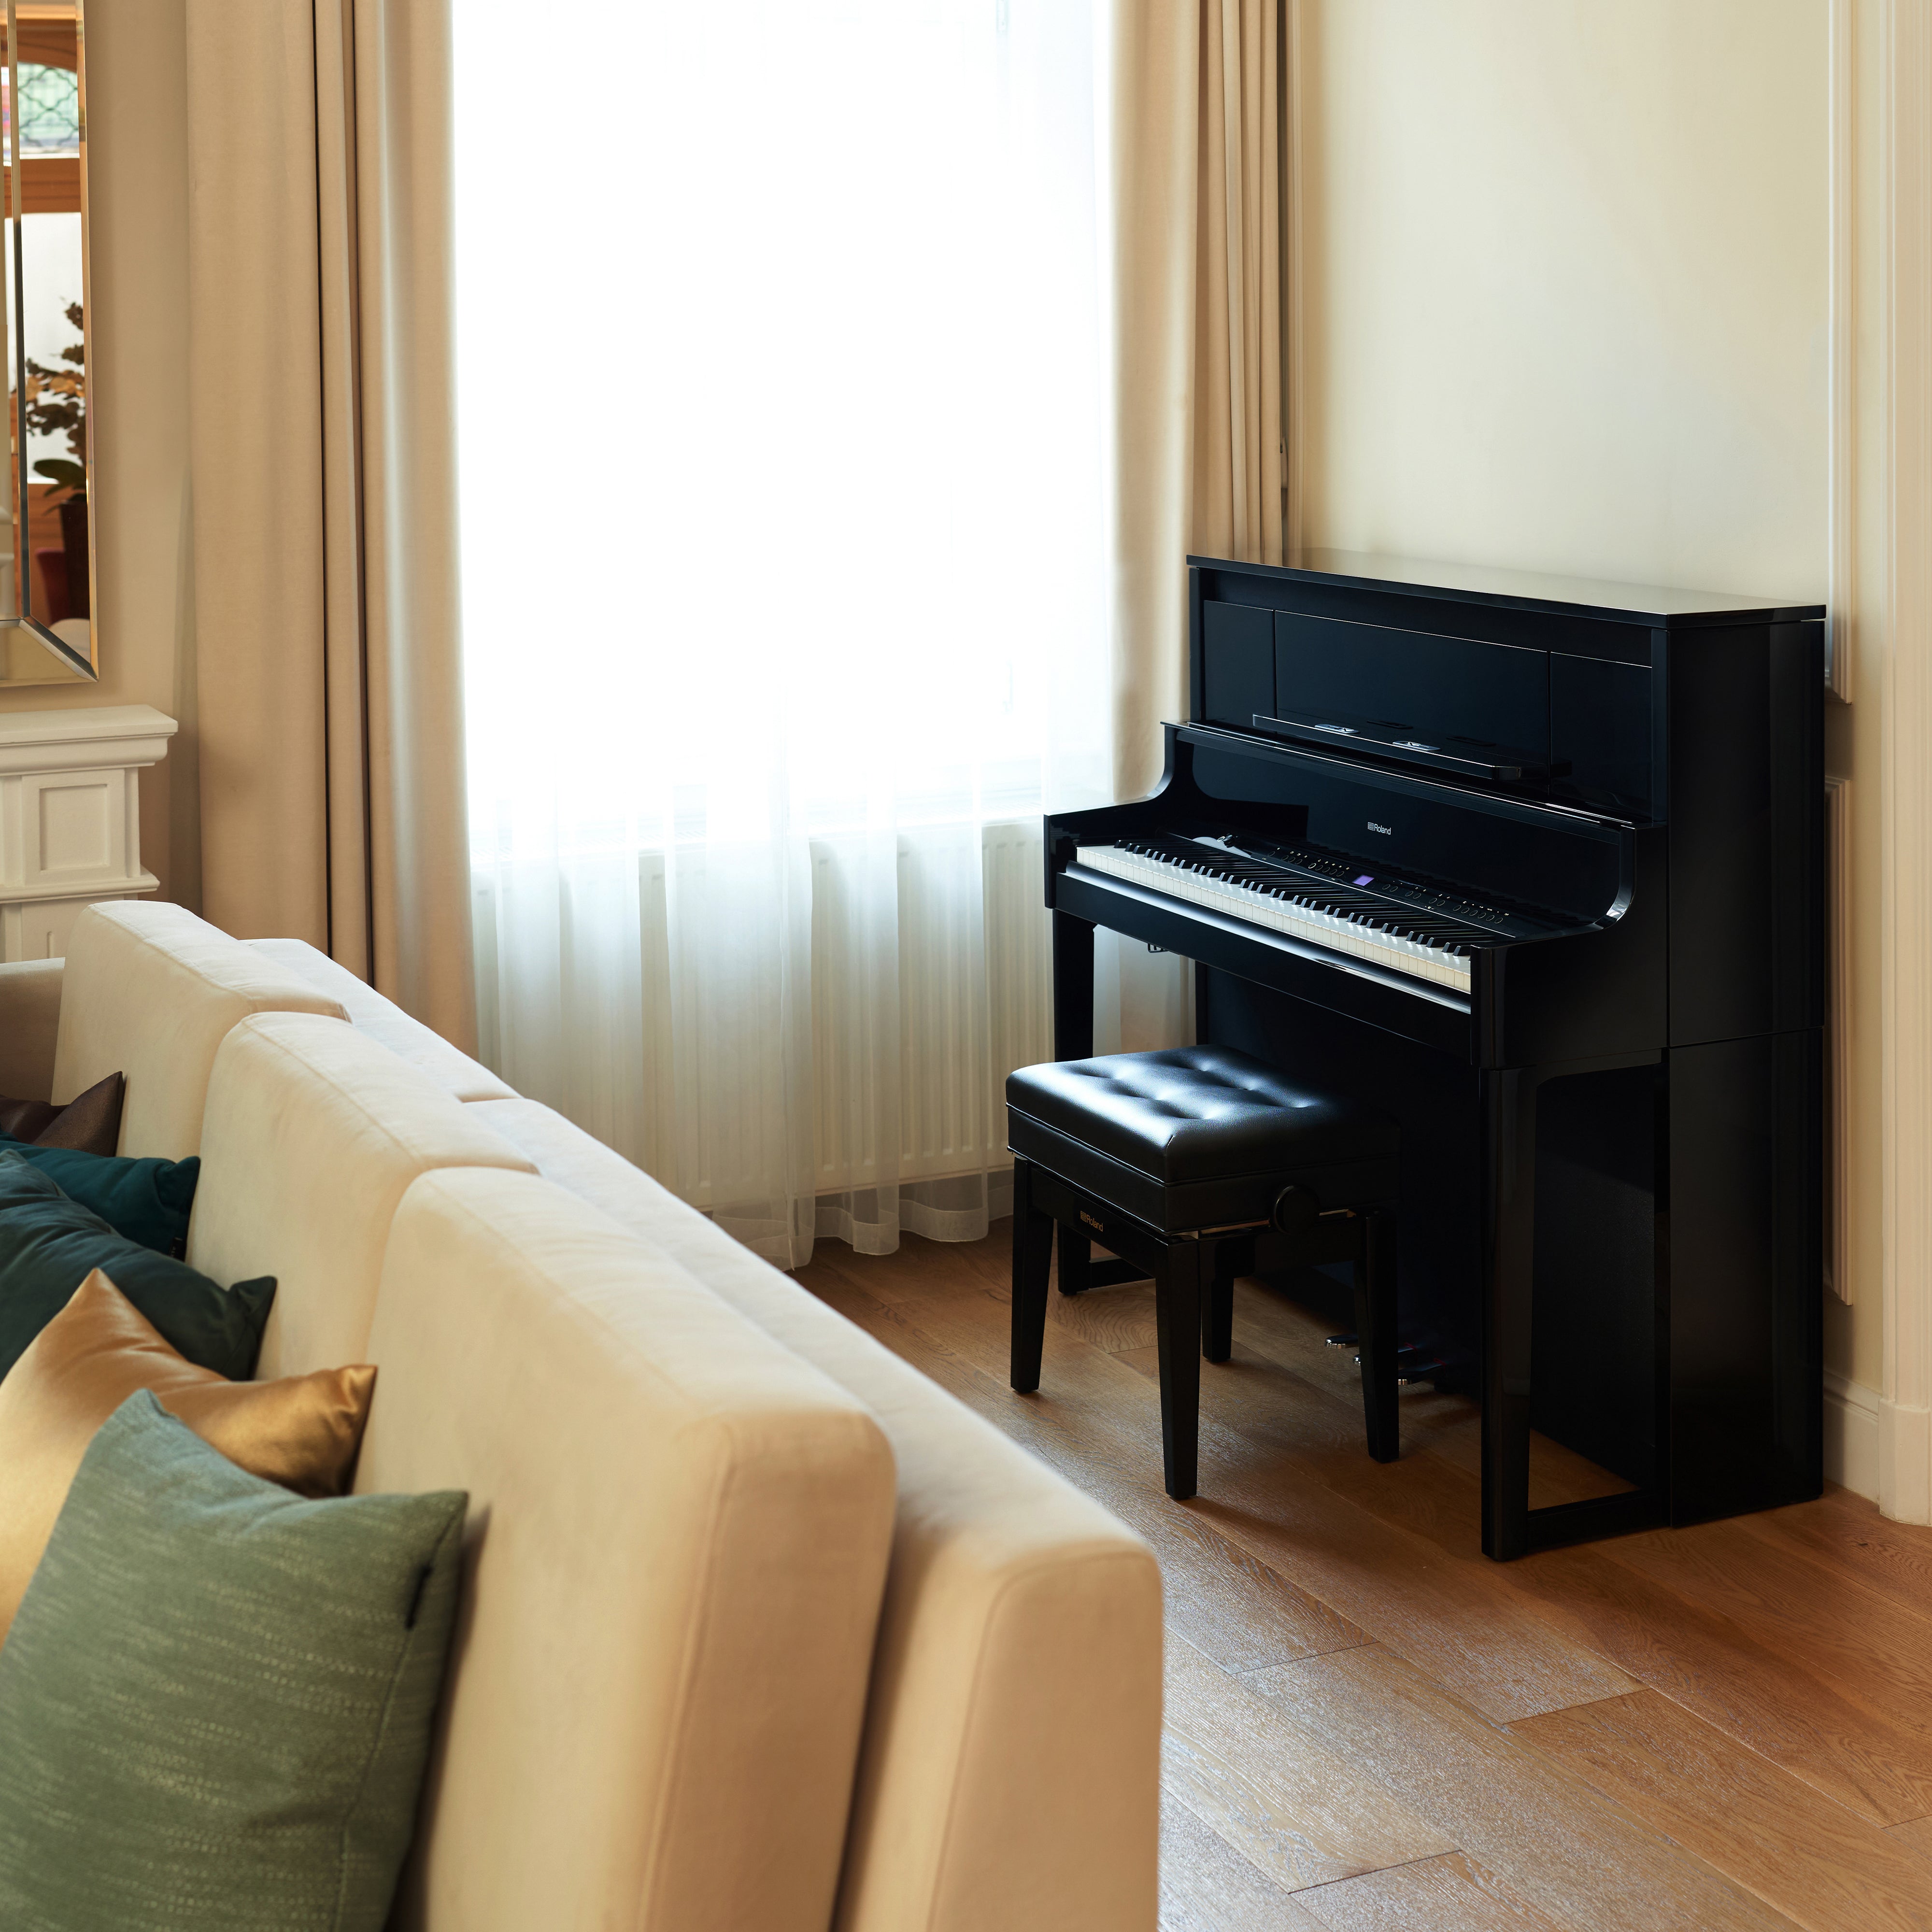 Roland LX-9 Digital Piano with Bench - Polished Ebony - in a stylish living room